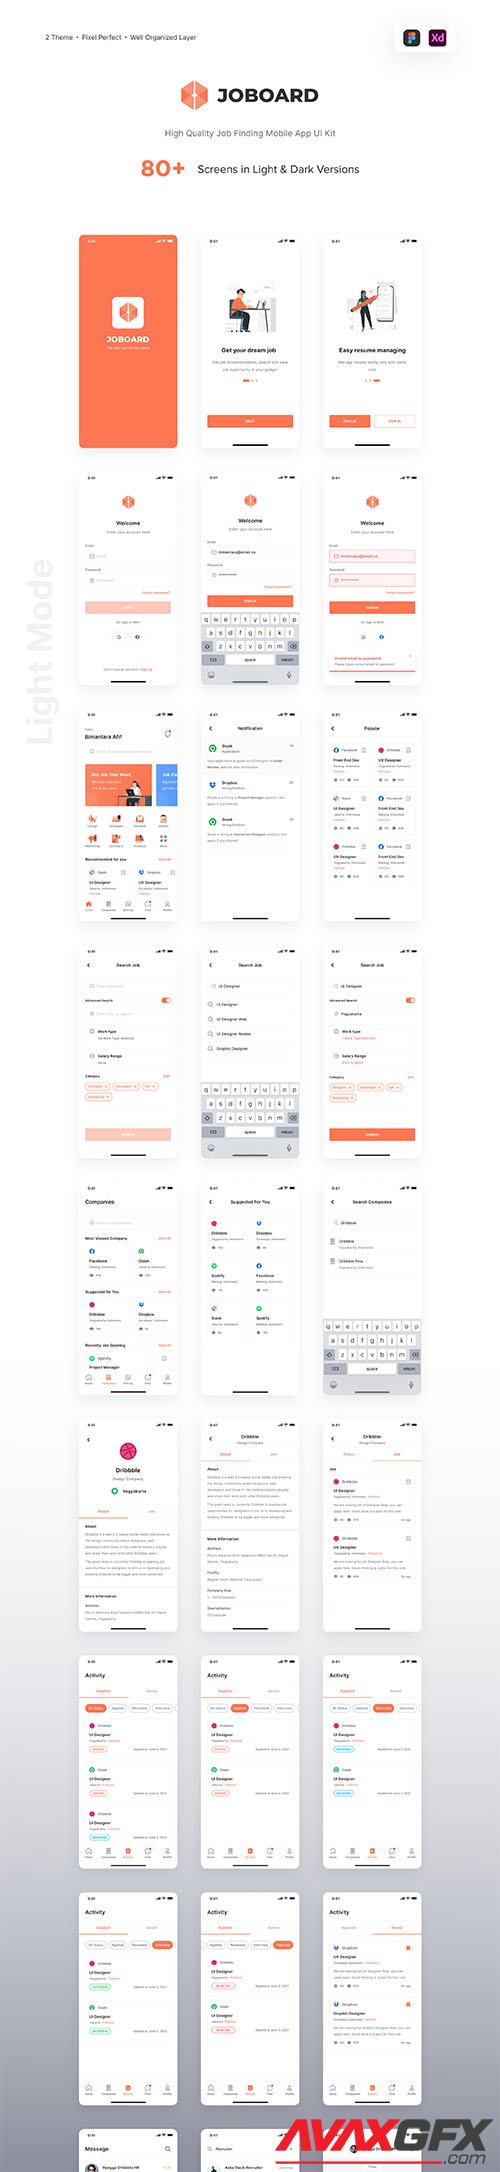 JOBOARD Job Finding & Search for Work UI Kit